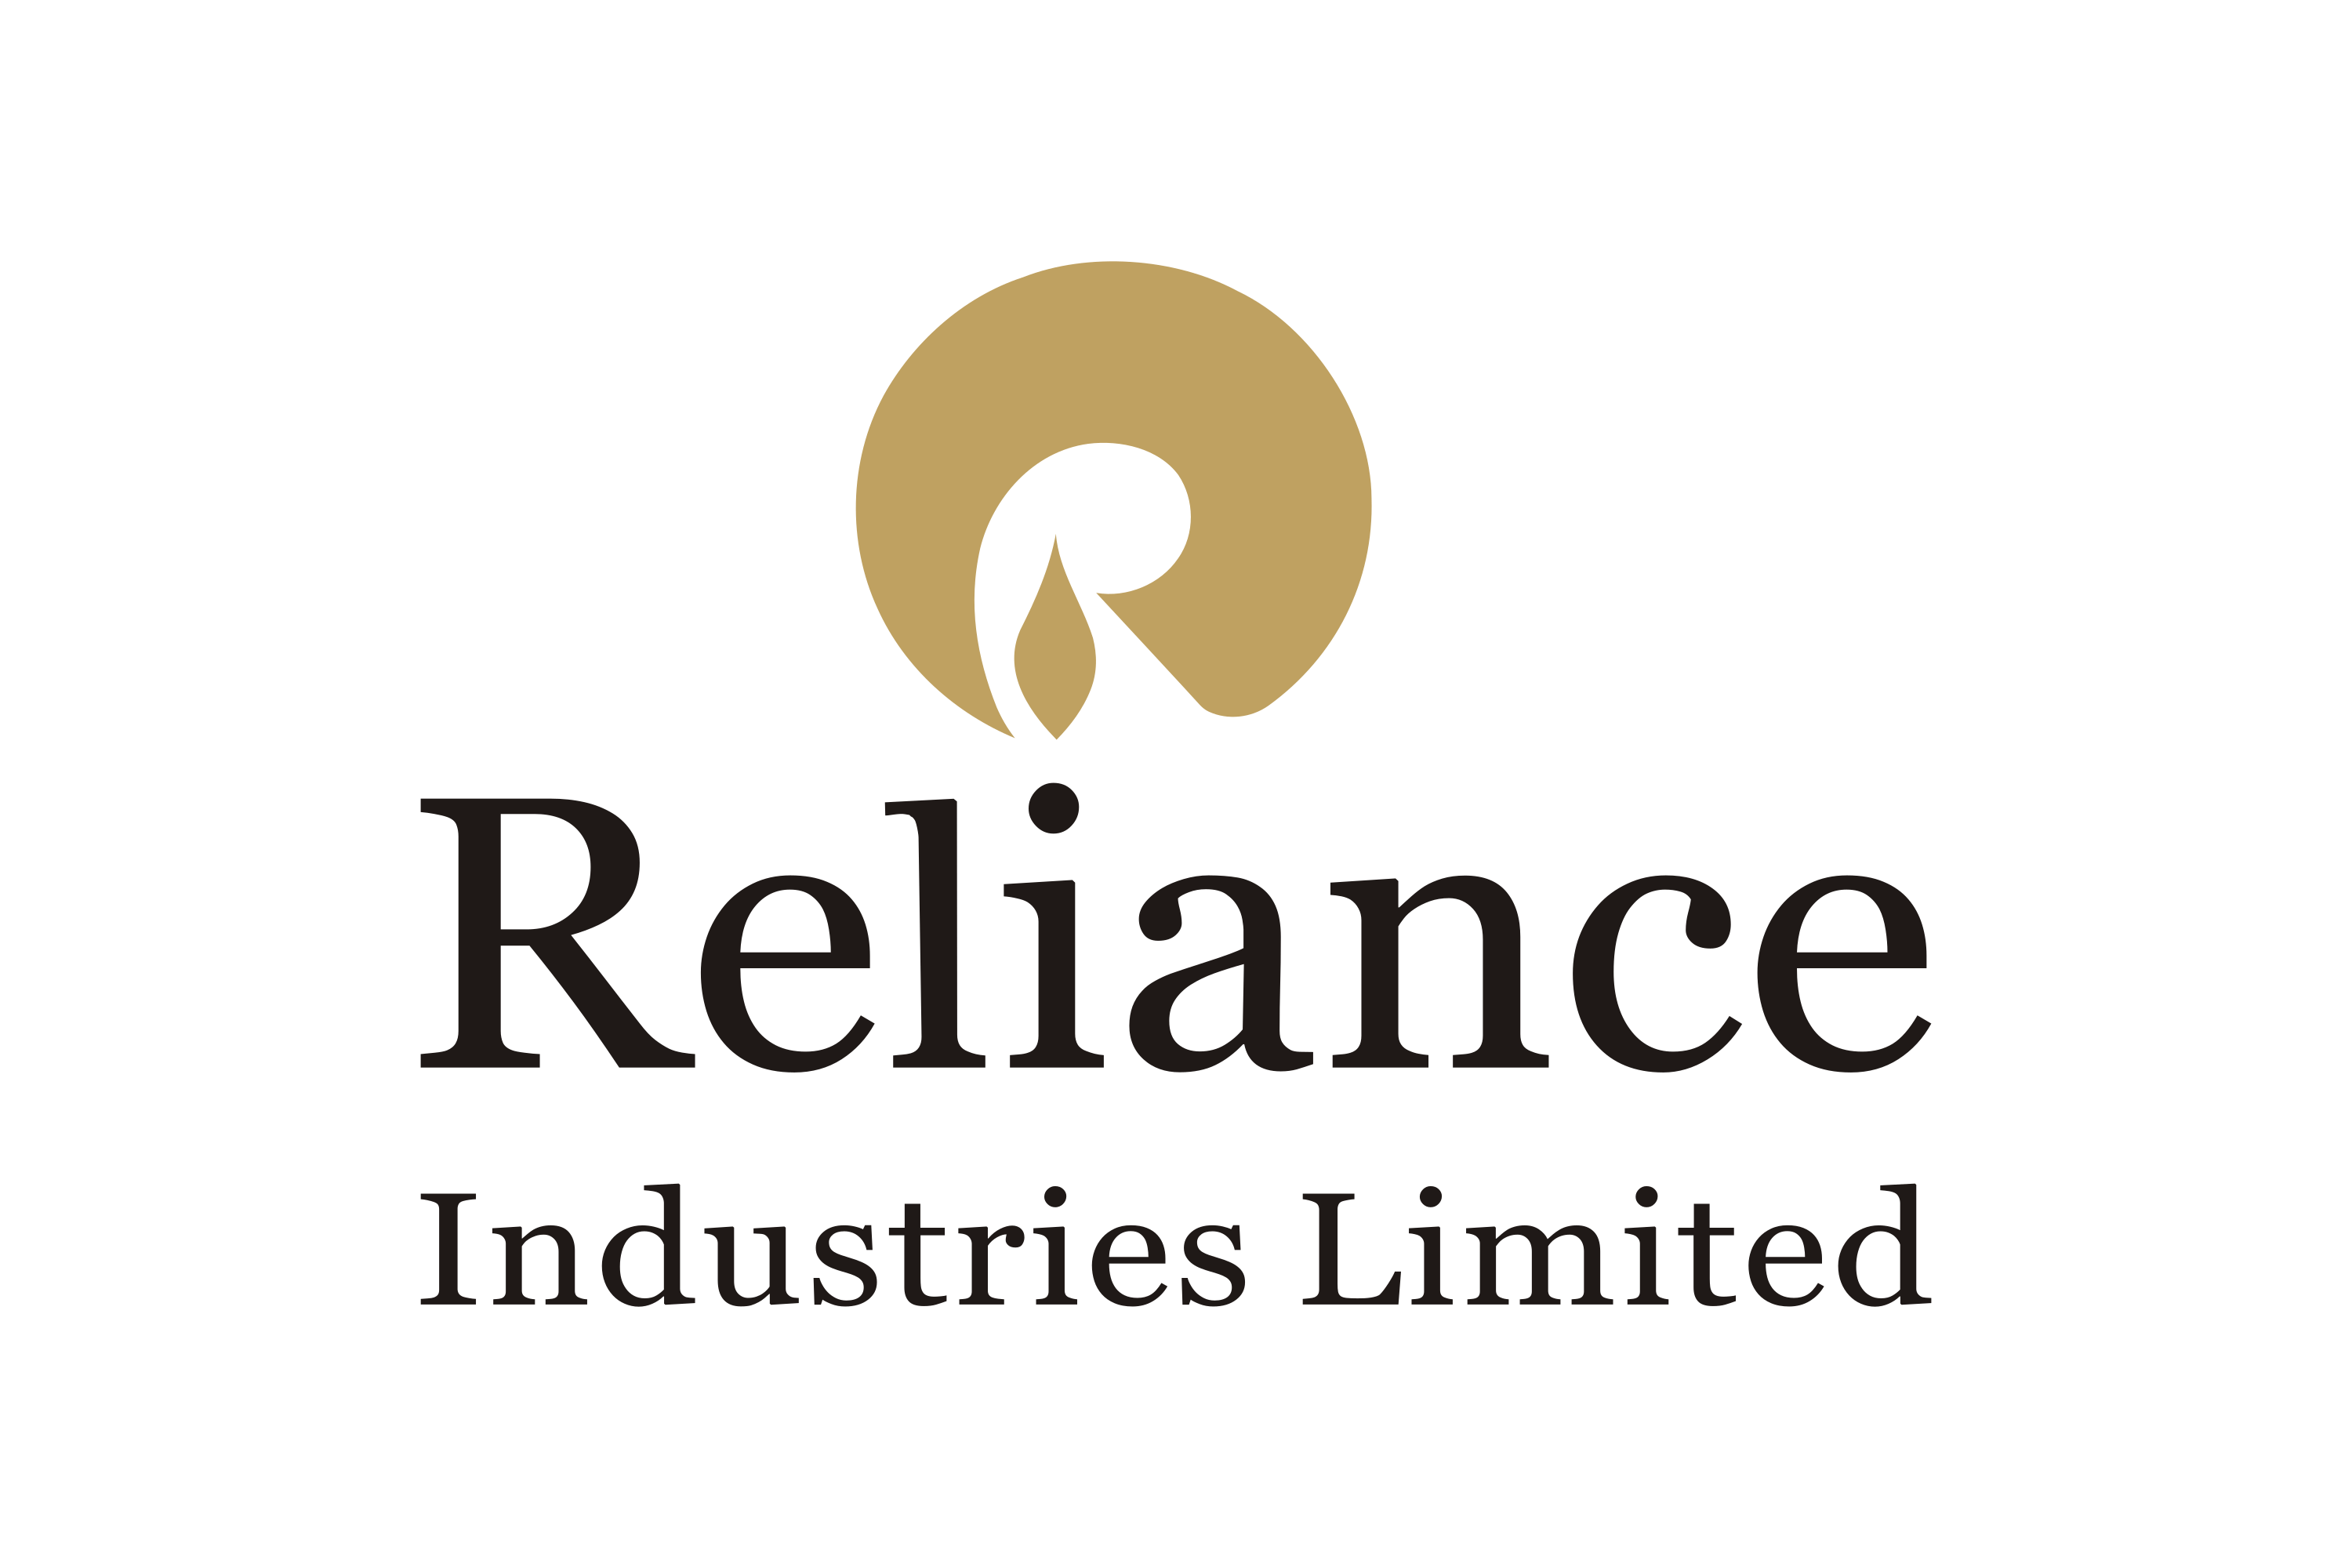 Download Reliance Private Limited Logo in SVG Vector or PNG File Format